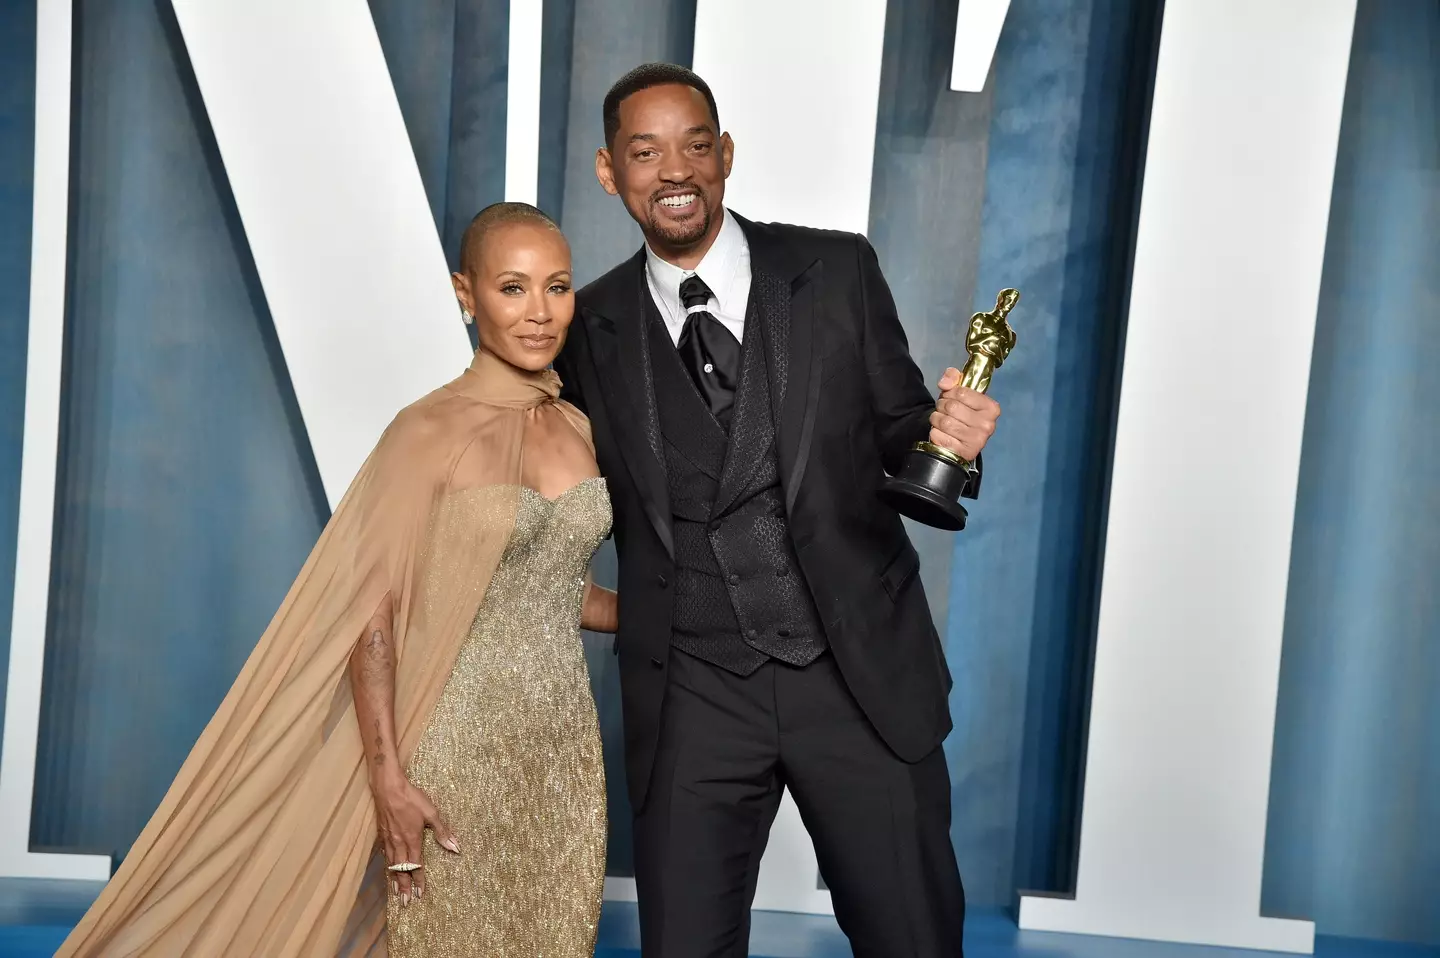 Will Smith and Jada Pinkett Smith married in 1997.